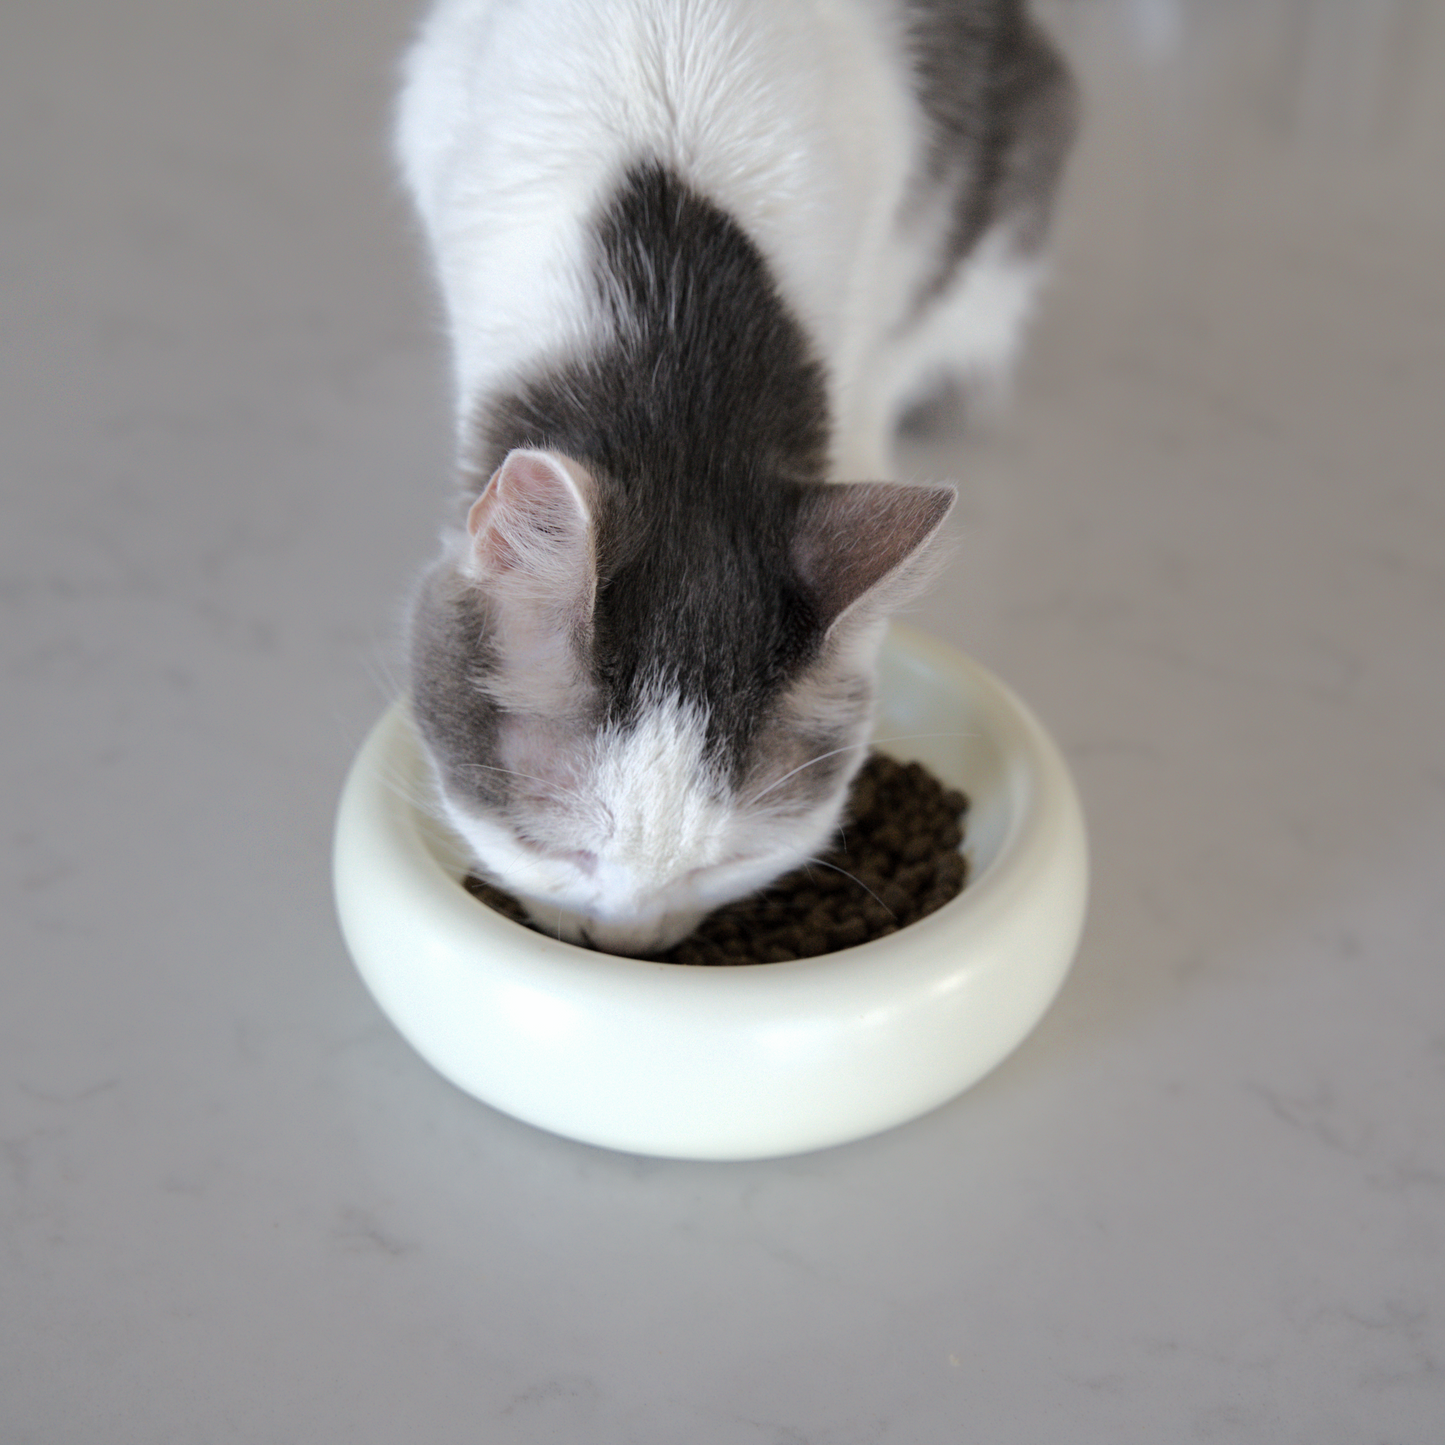 grey and white cat eating from white catenary modern cat bowl on marble kitchen countertop